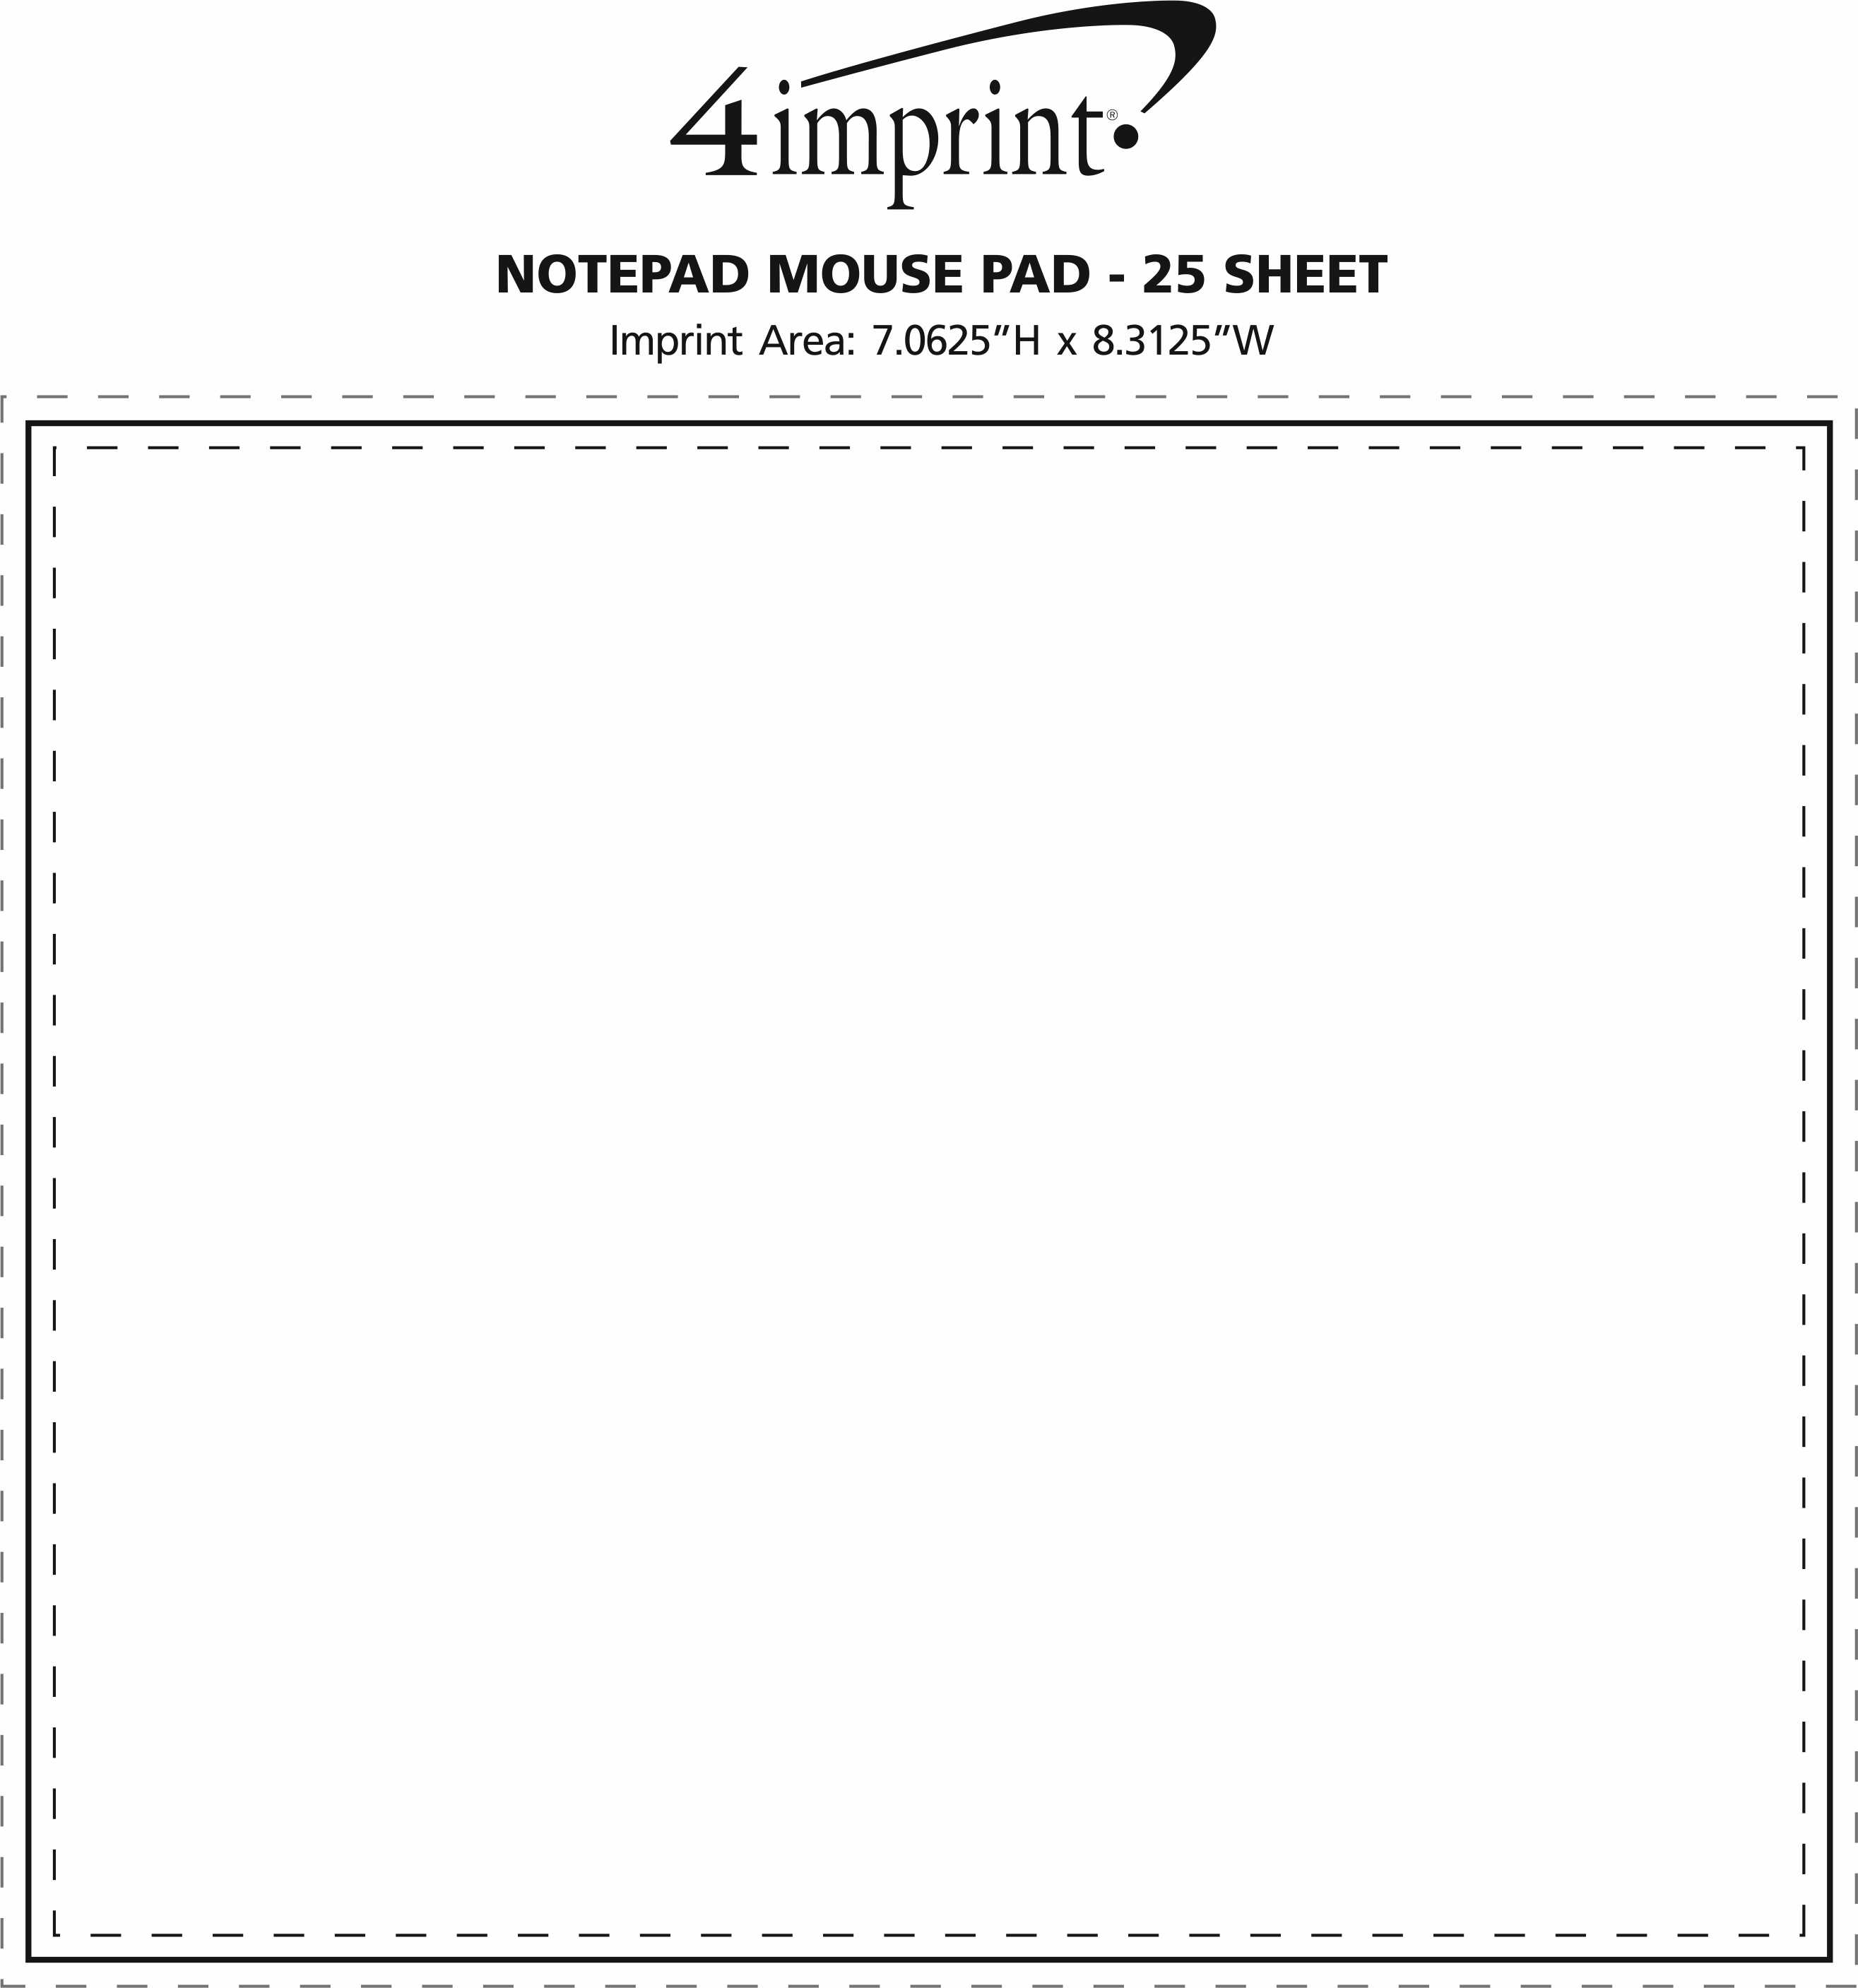 Imprint Area of Notepad Mouse Pad - 25 Sheet